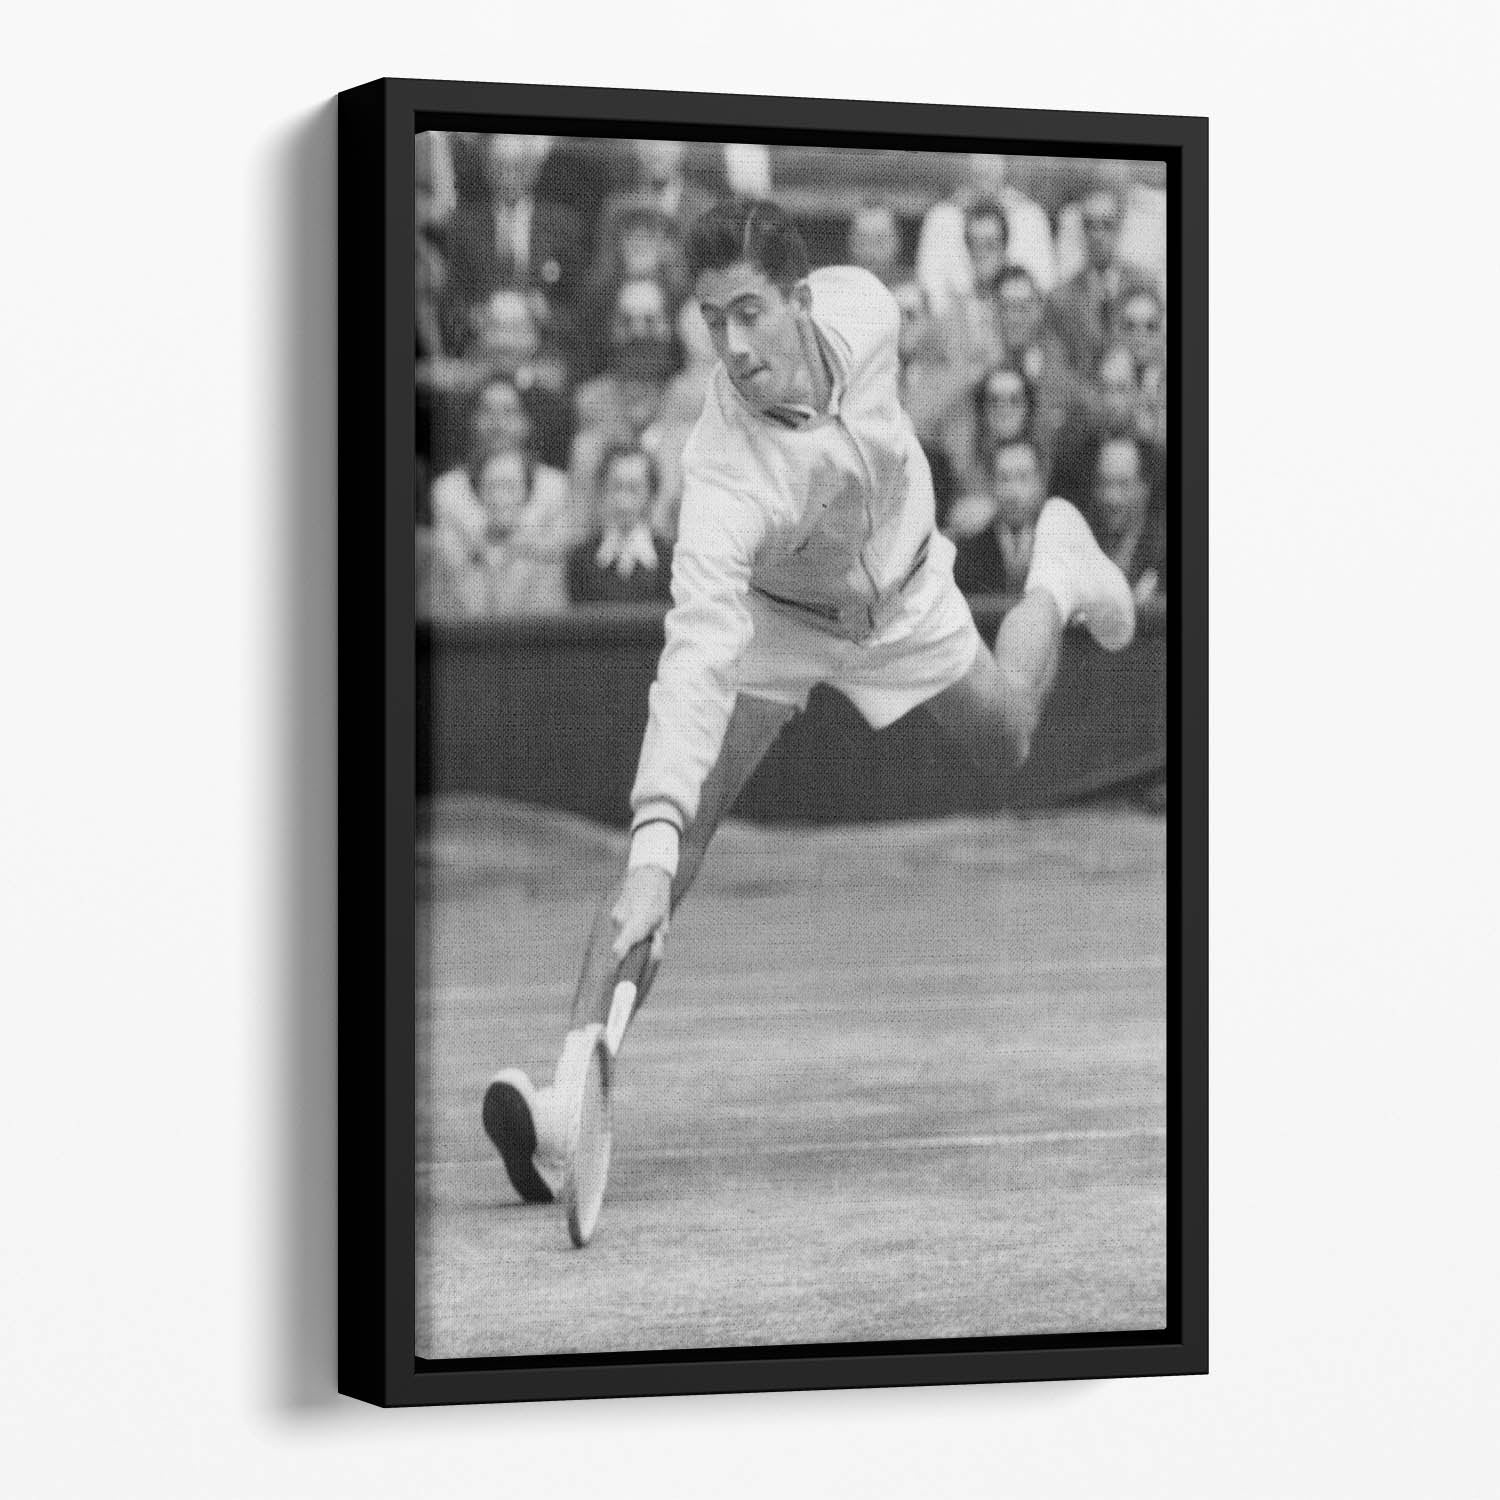 Ken Rosewall in action at Wimbledon Floating Framed Canvas